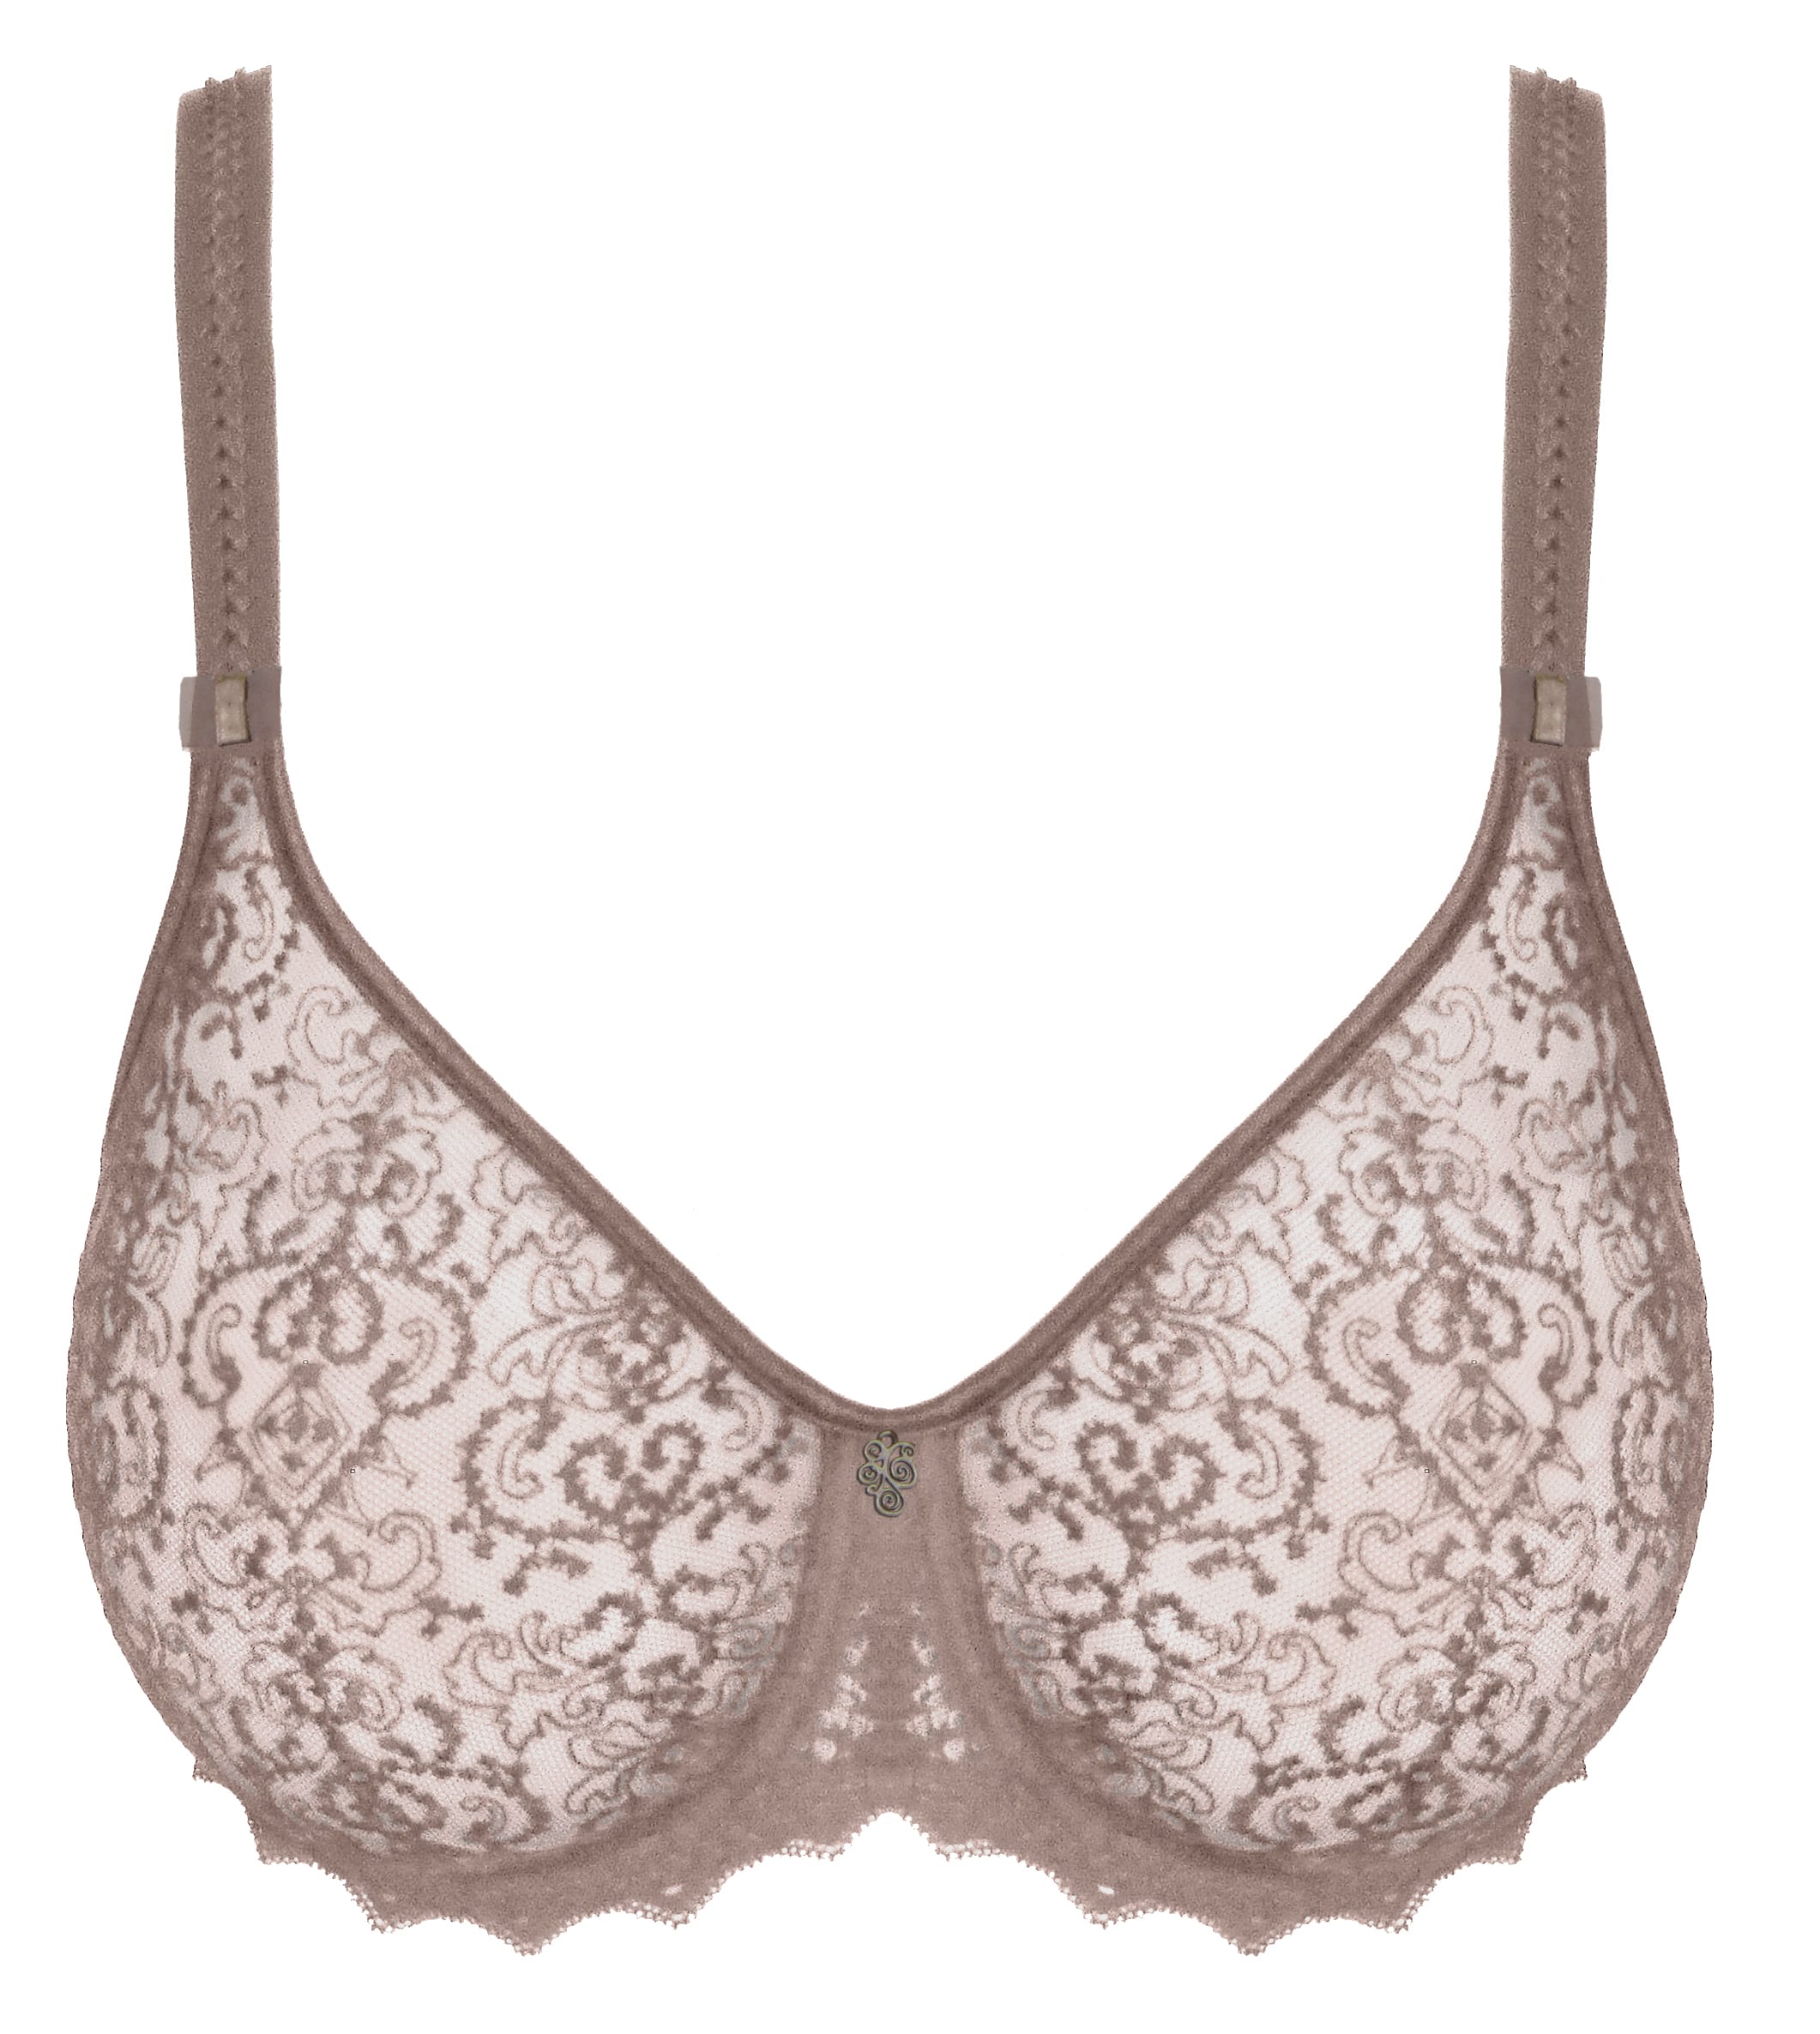 Papillon Unlined underwired cotton bra CUP B S335: for sale at 11.99€ on